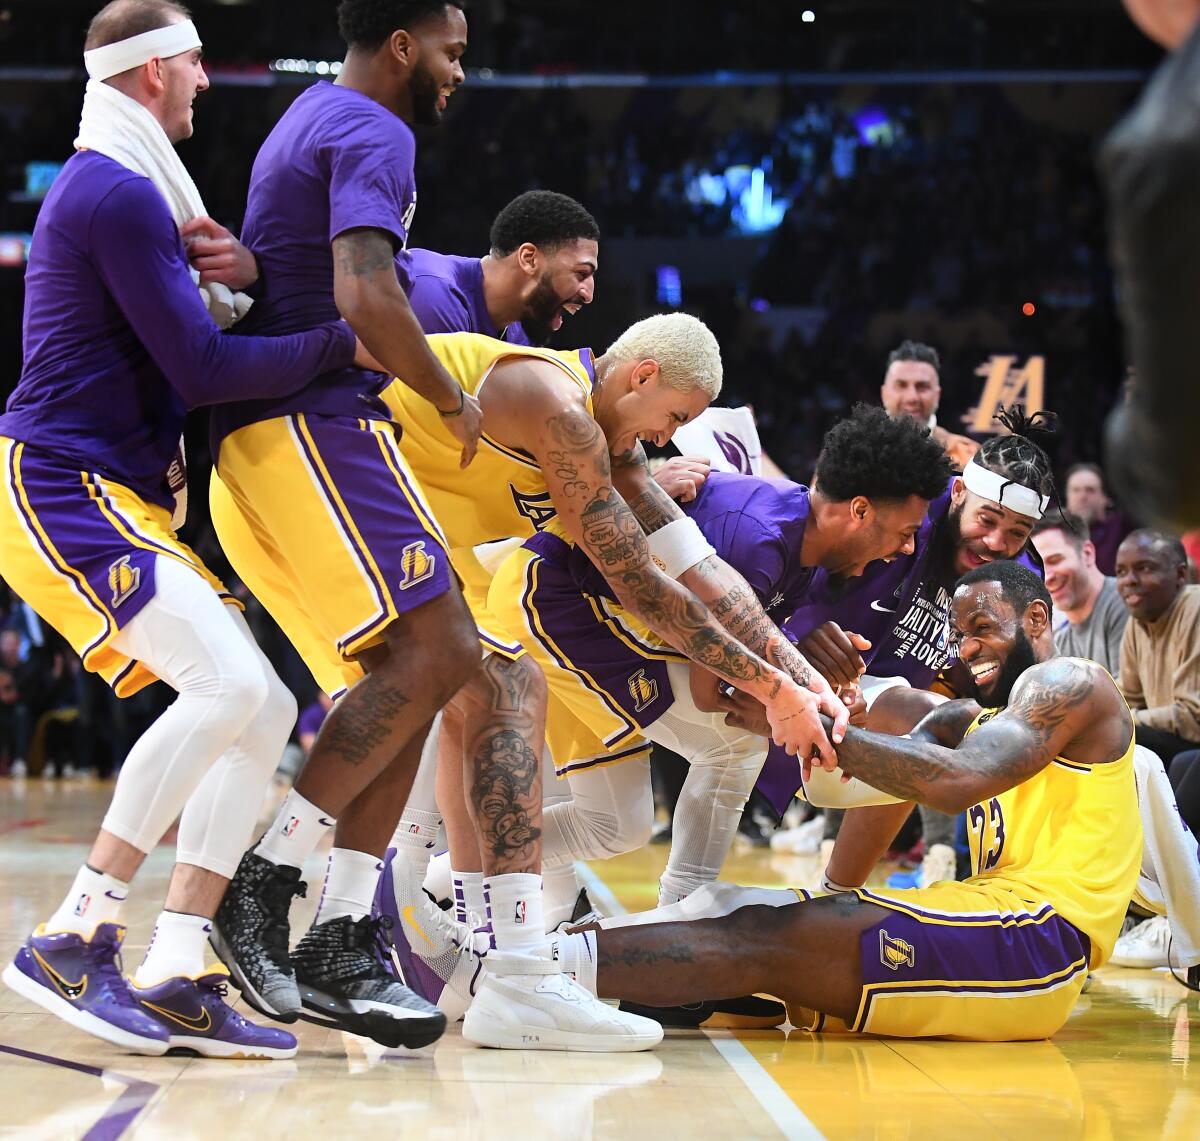 LeBron James is mobbed by his Lakers teammates after hitting a three-pointer against the Spurs on Feb. 4 at Staples Center.